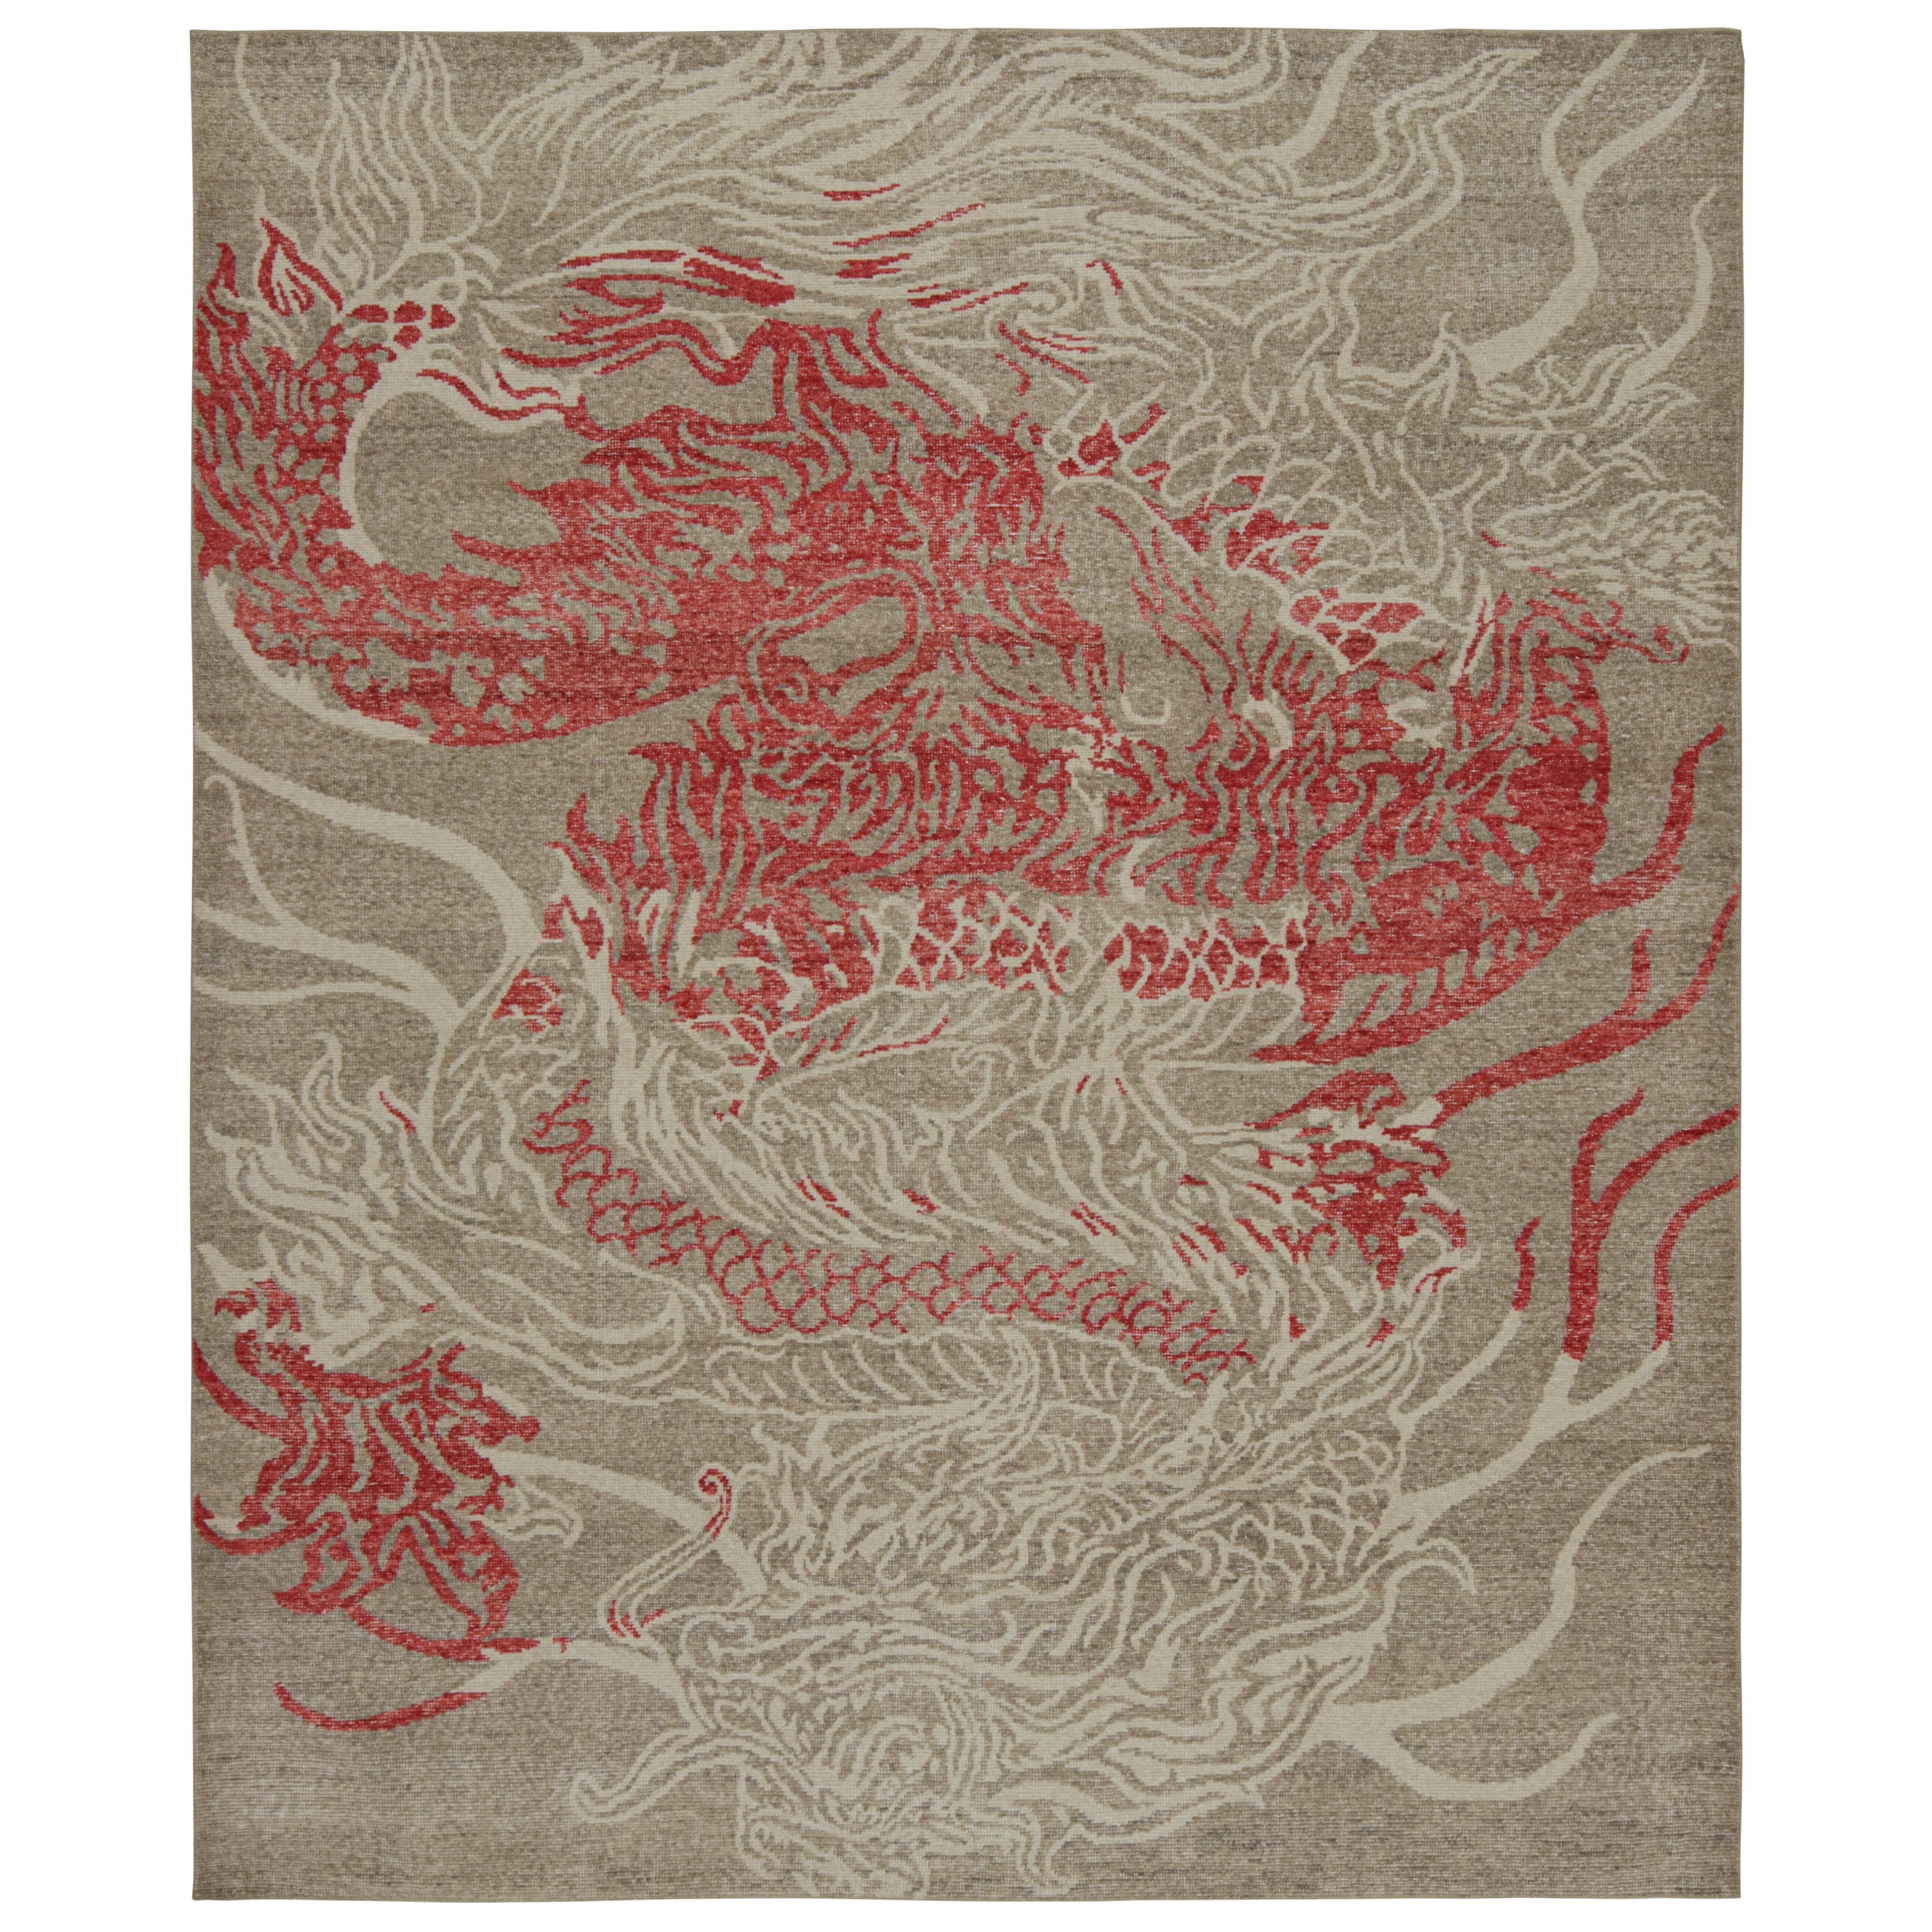 Rug & Kilim’s Modern Pictorial Rug in Beige and Gray, with Red Dragon Pattern